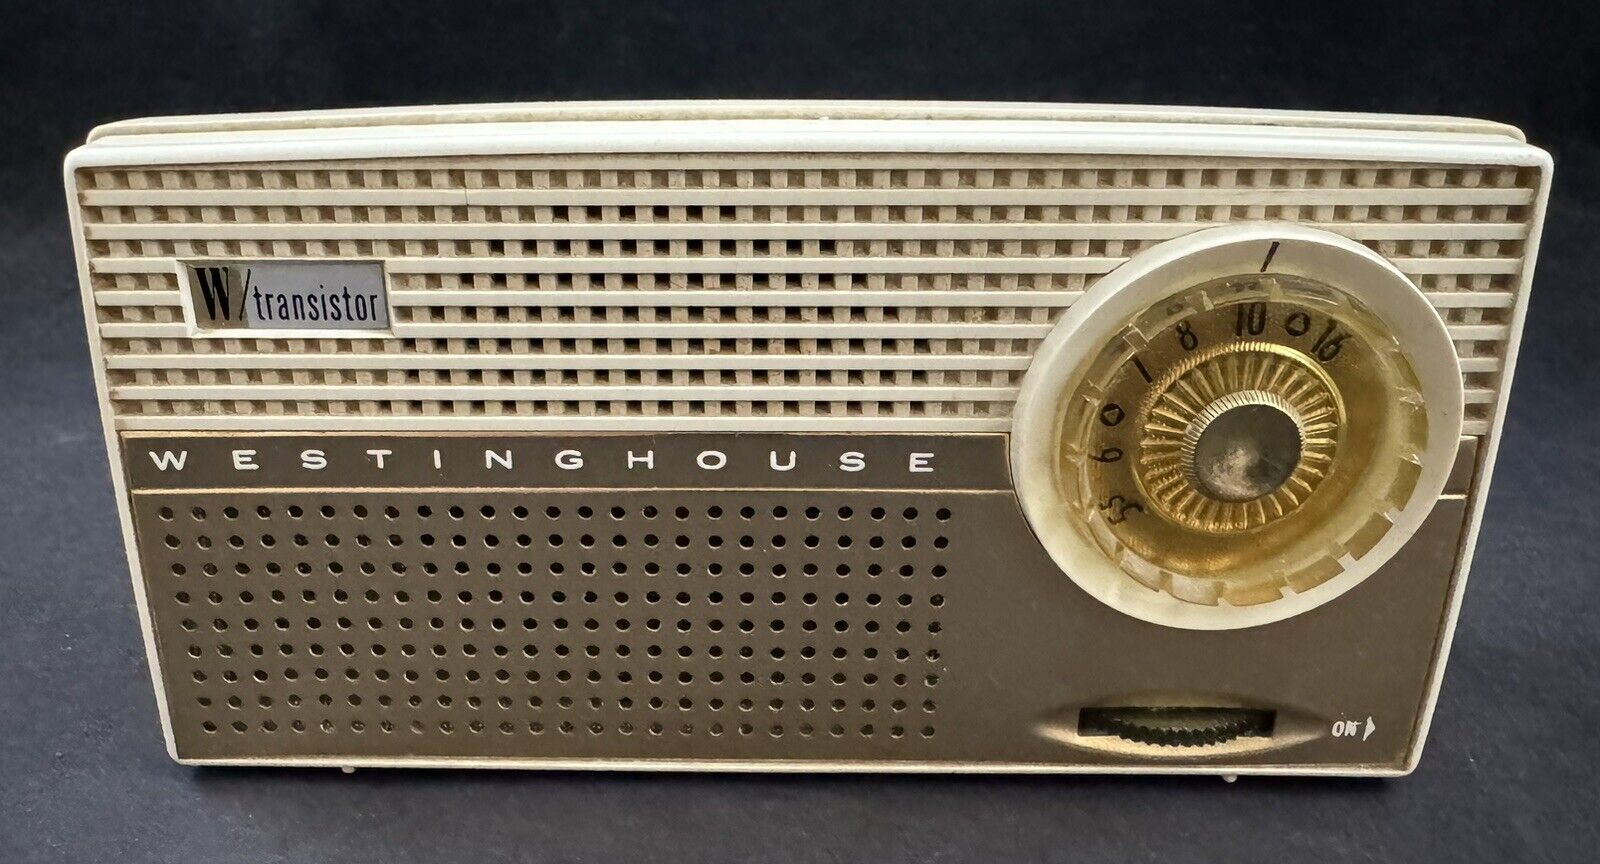 Vintage Westinghouse H-653P6 Transistor Radio w/ Unbreakable Case - Made in USA